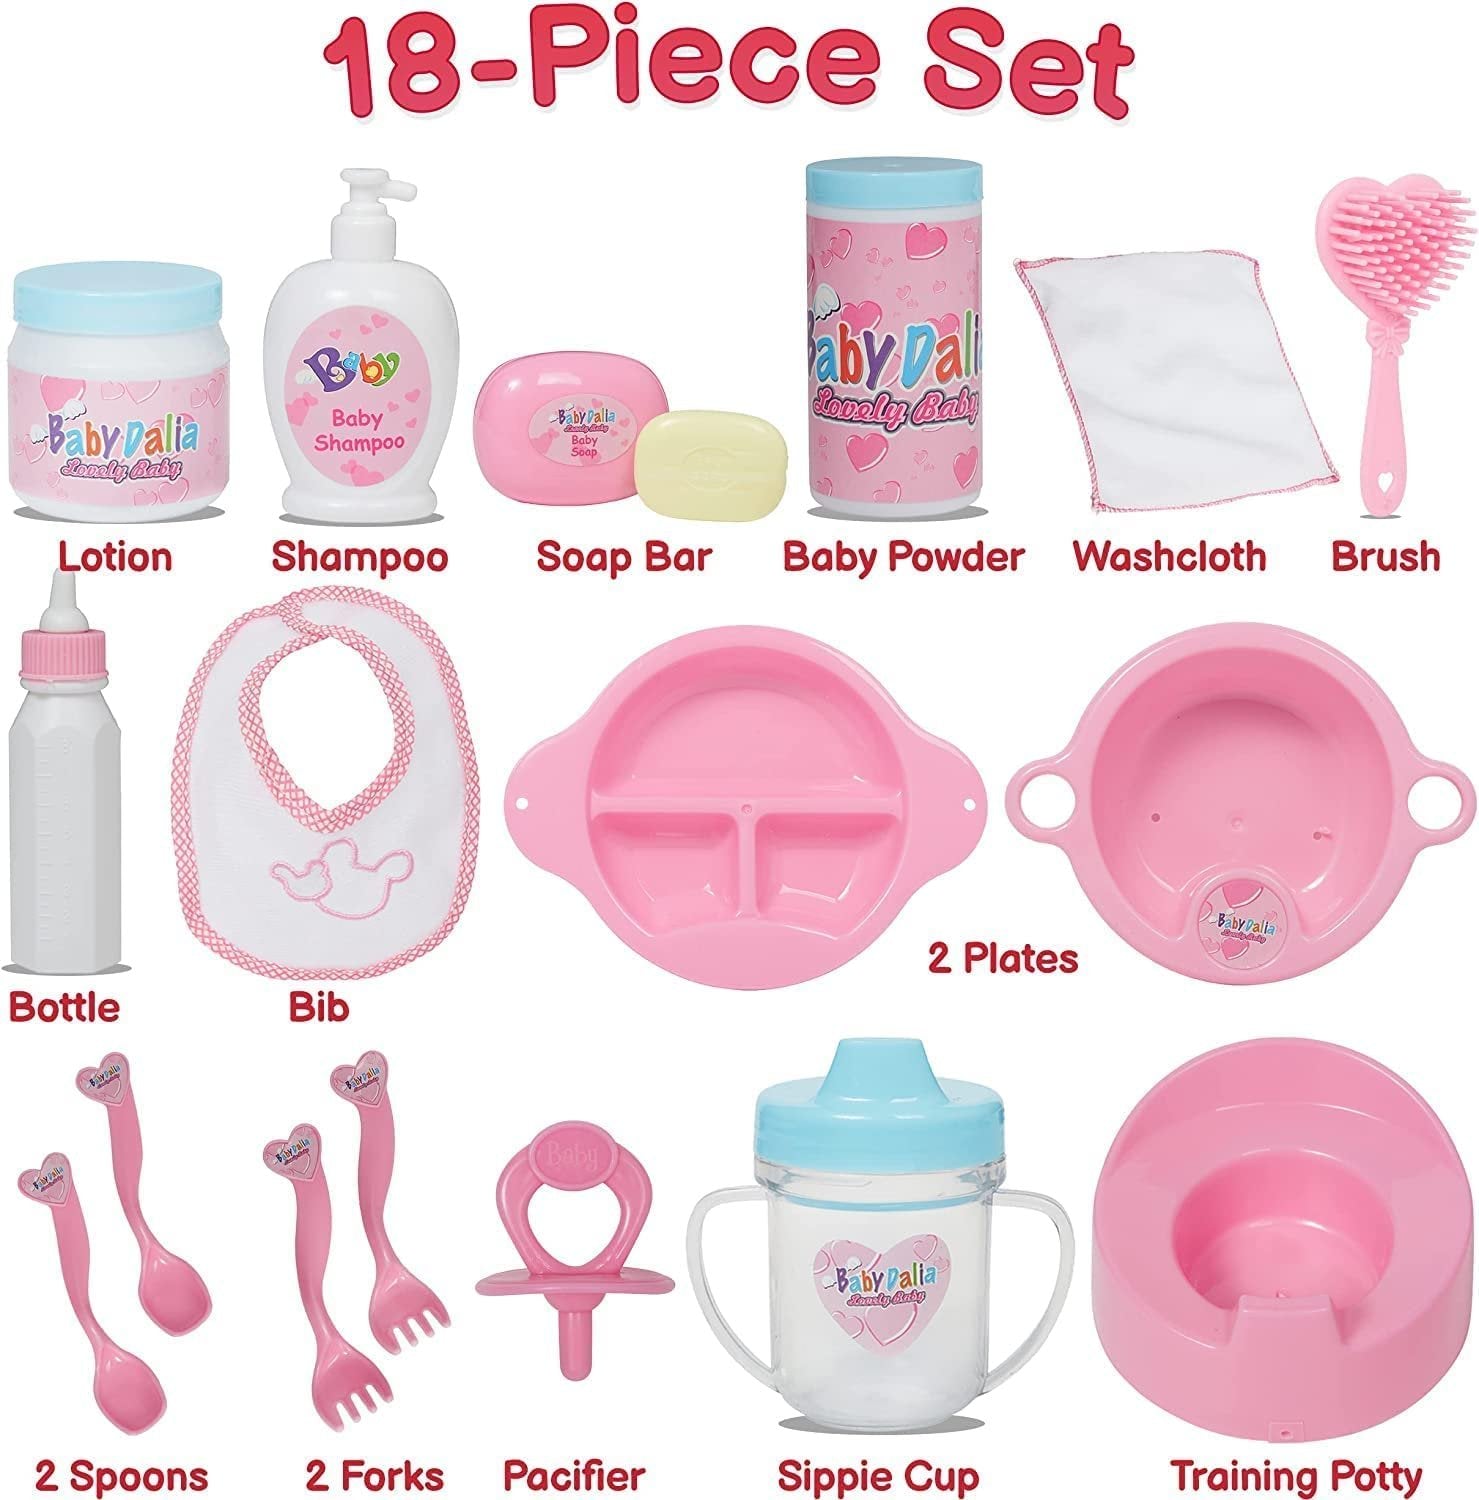 PREXTEX 18-Piece Baby Doll Accessories Set with Carrying Case - Includes Bottle, Sippy Cup, Pacifier, Bib, Hair Brush, Plates and More, Perfect for Kids, Toddlers, and Girls